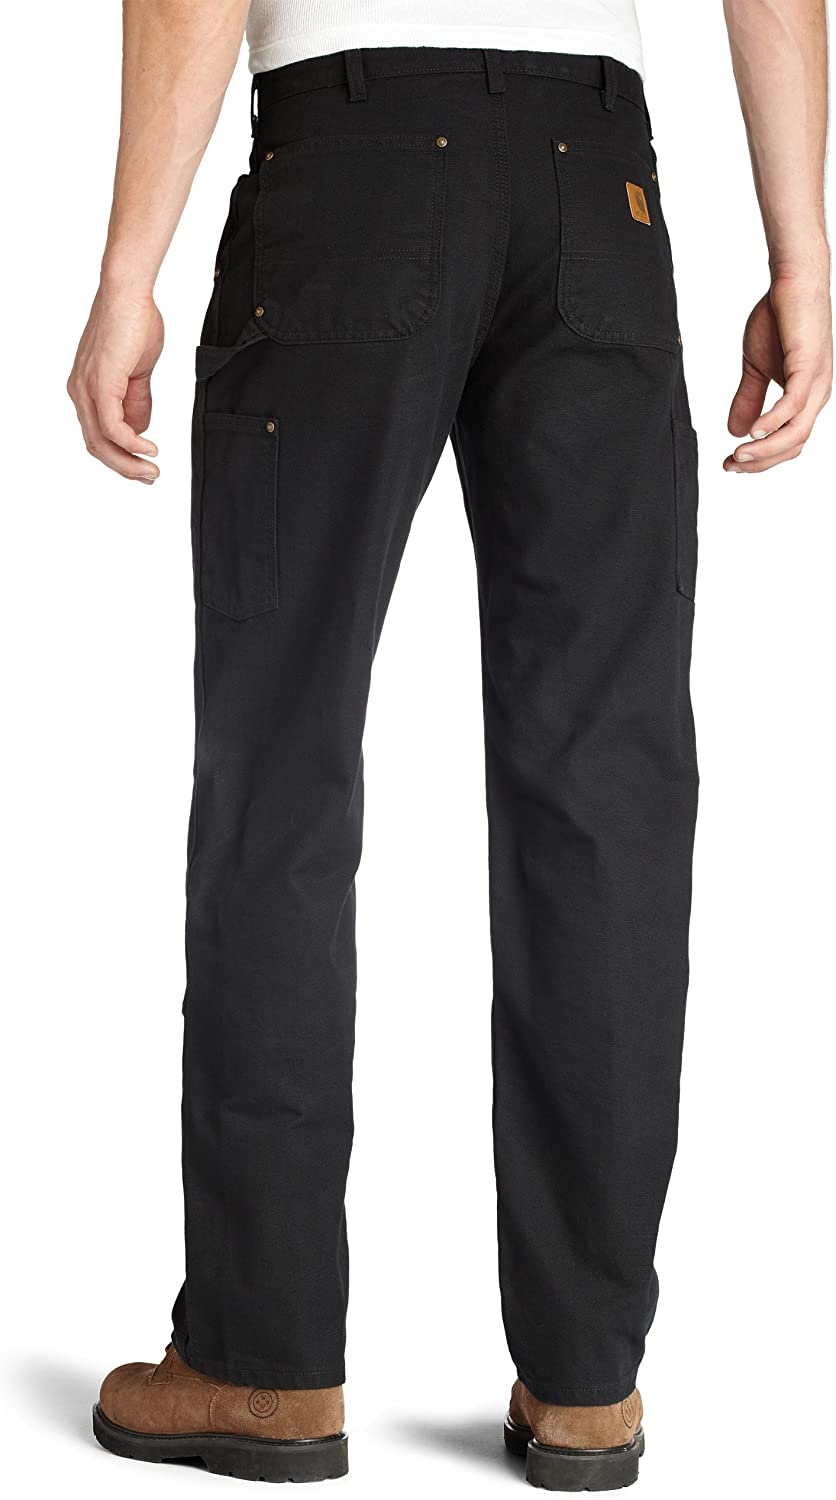 Carhartt Men's Washed-Duck Double-Front Work Dungaree (46x30 Black)